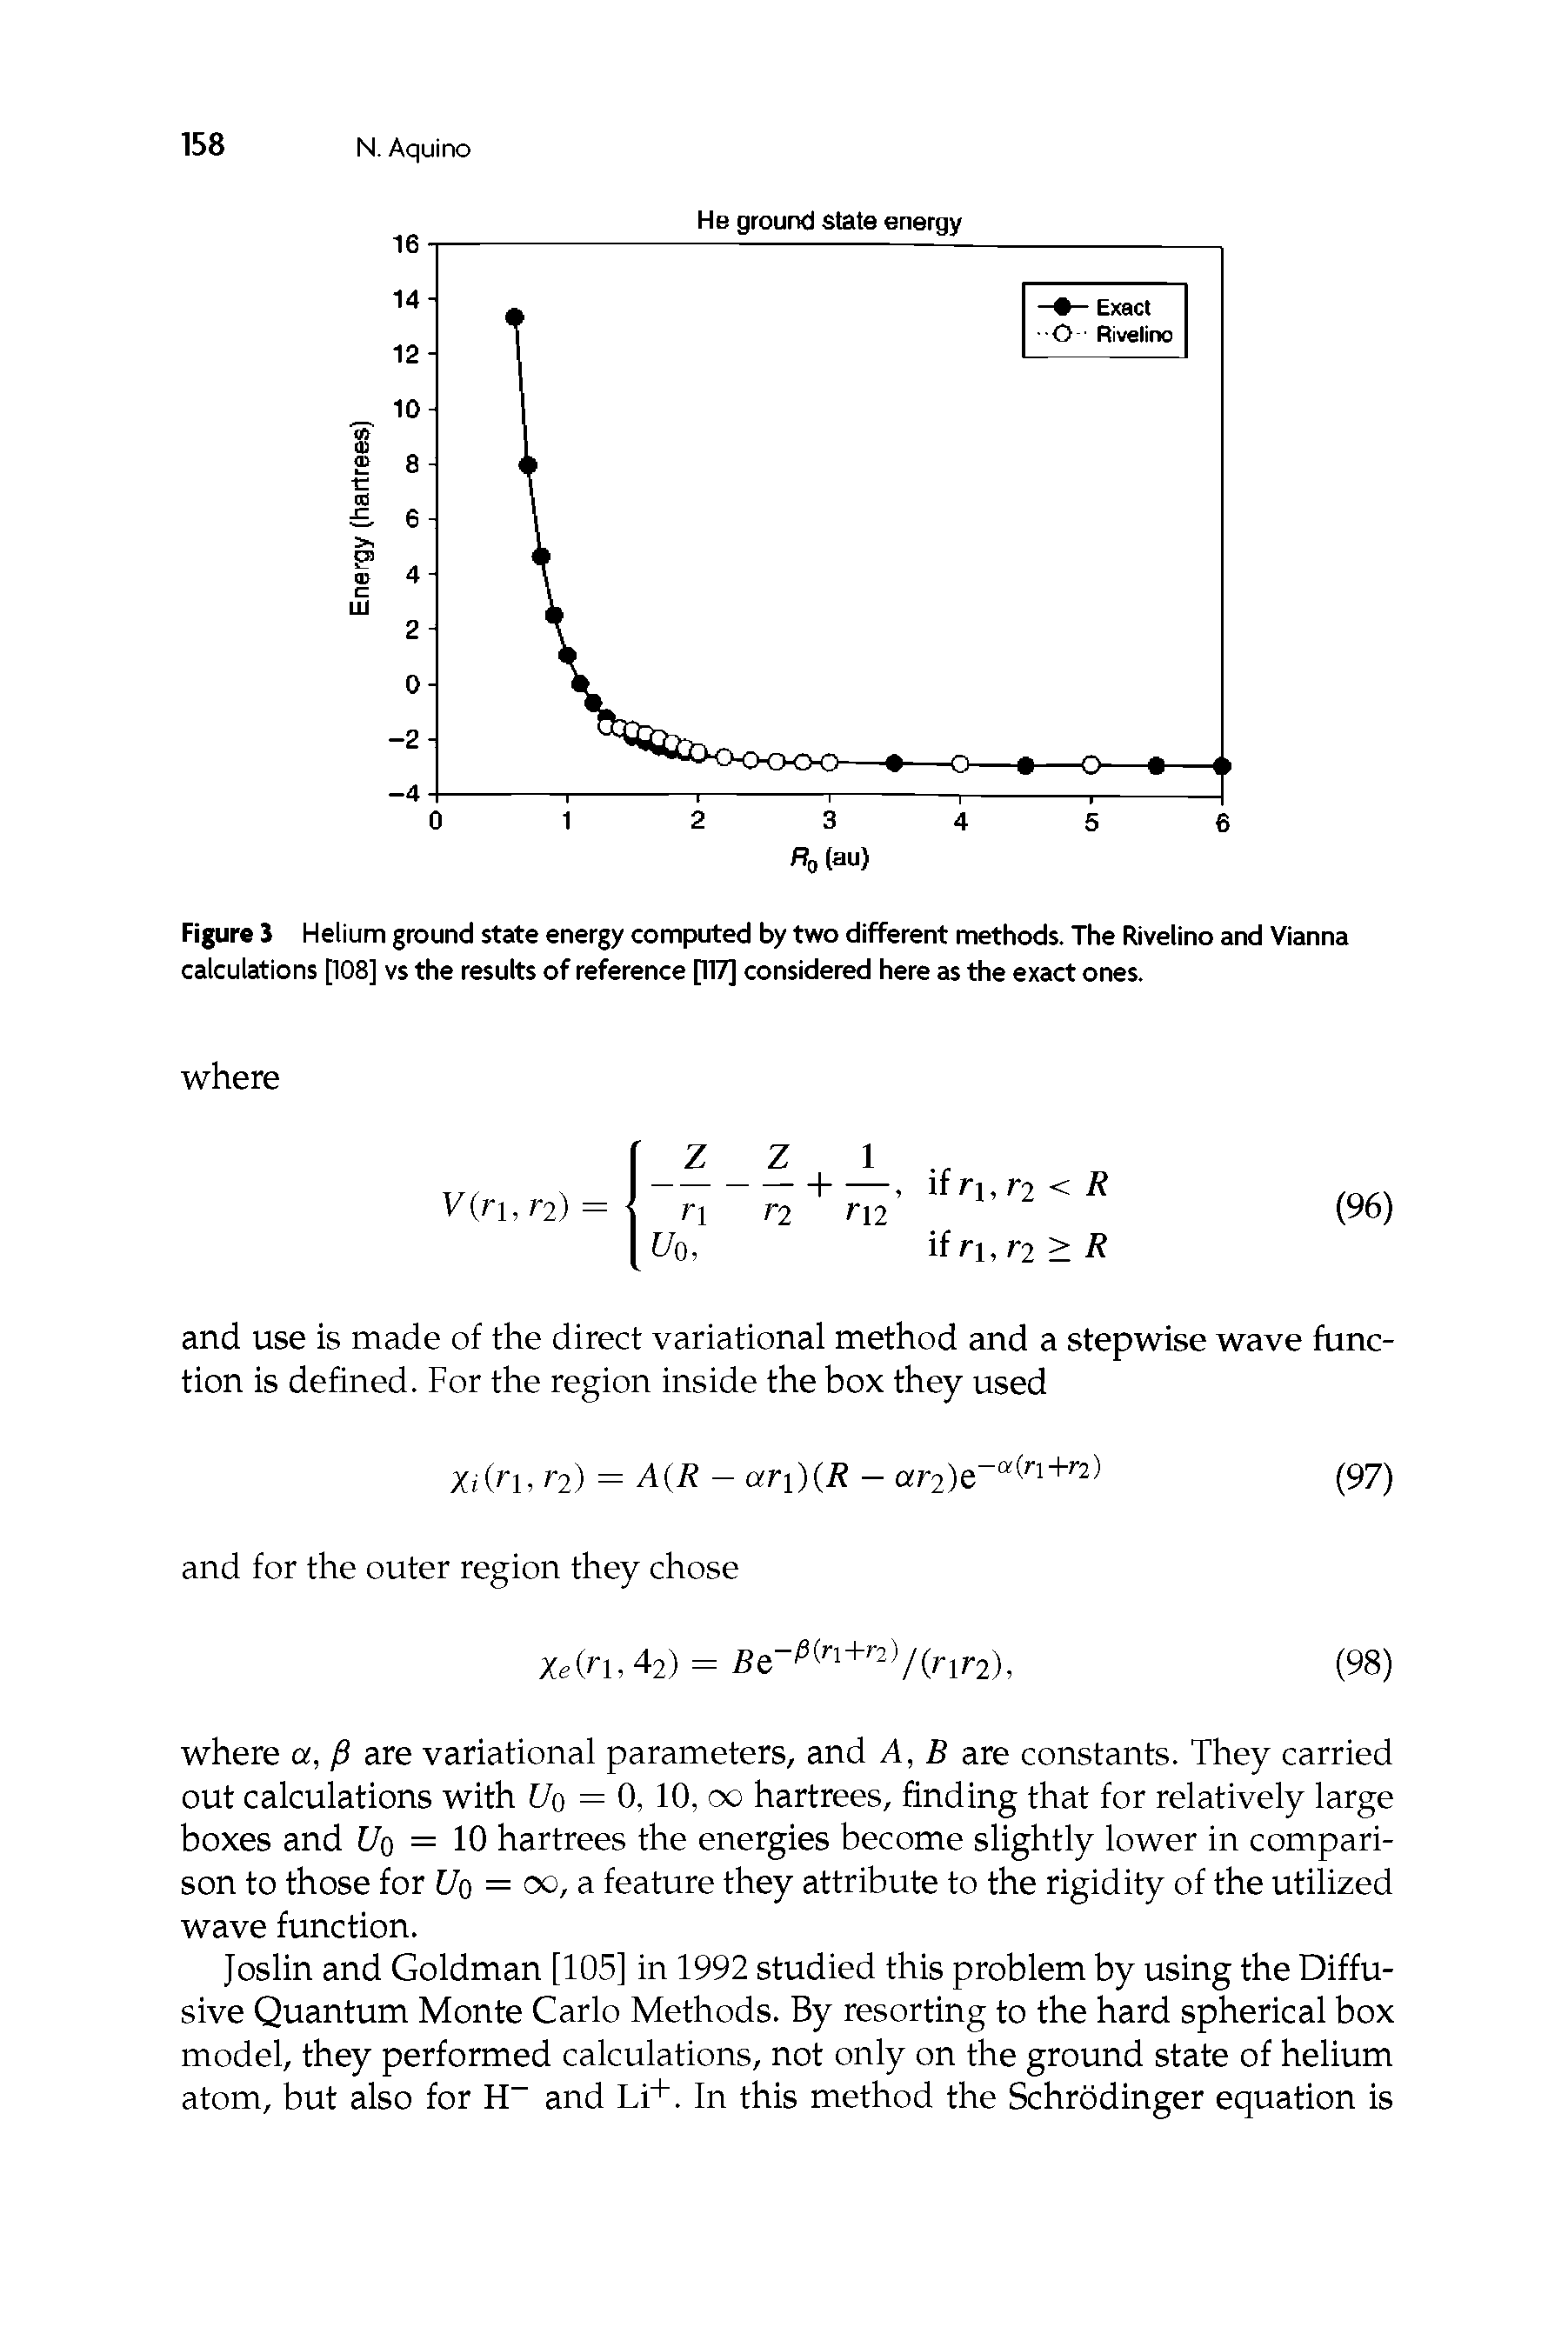 Figure J Helium ground state energy computed by two different methods. The Rivelino and Vianna calculations [108] vs the results of reference [117] considered here as the exact ones.